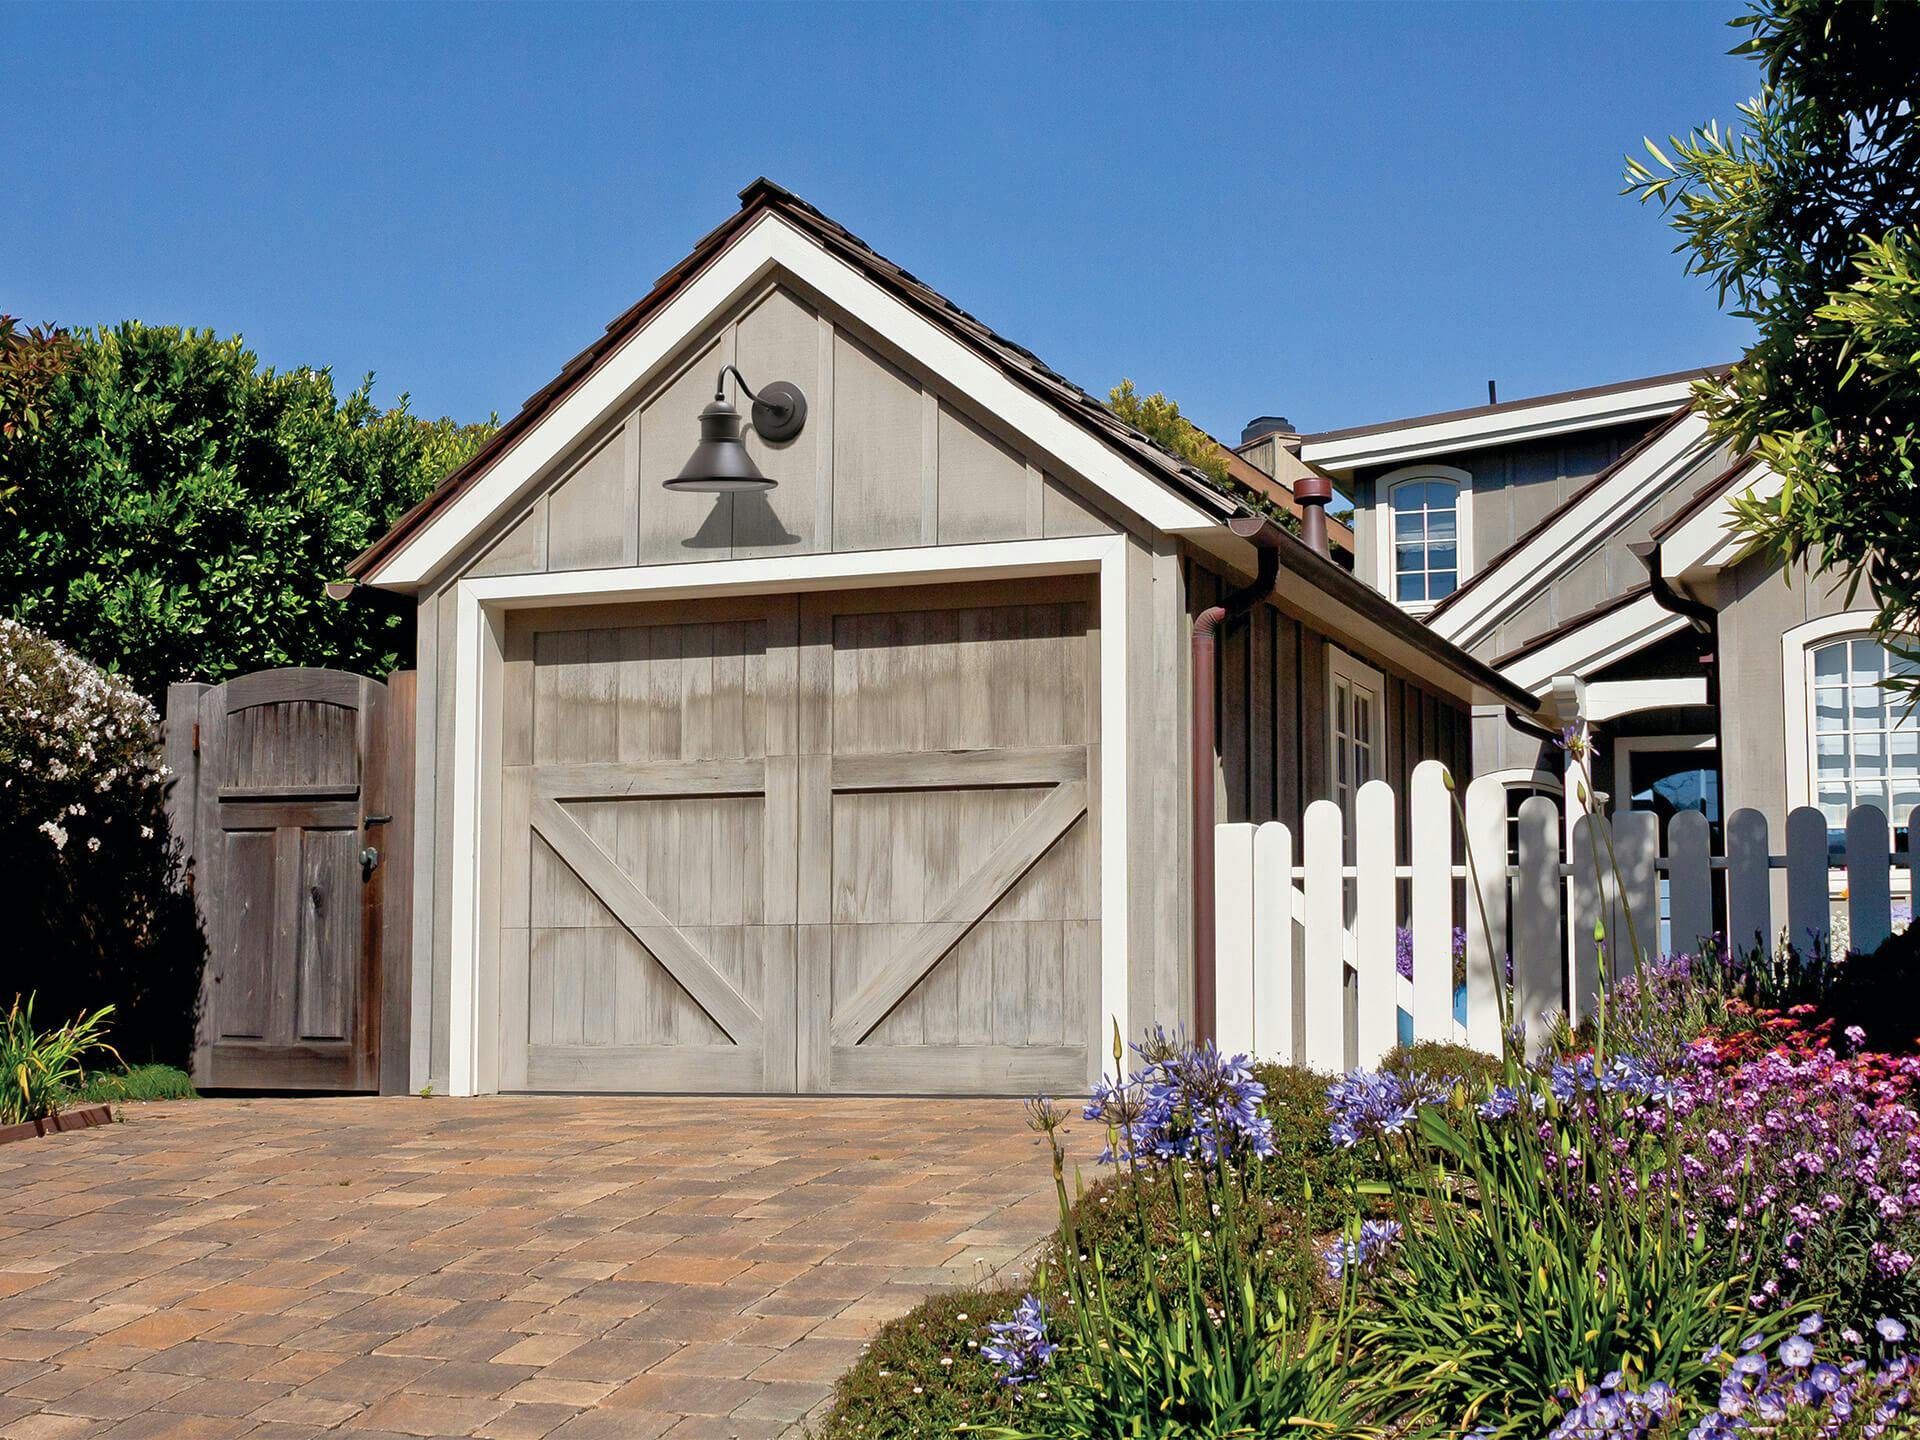 Exterior image of a garage door with a Northland exterior wall light above the garage door in the daytime 